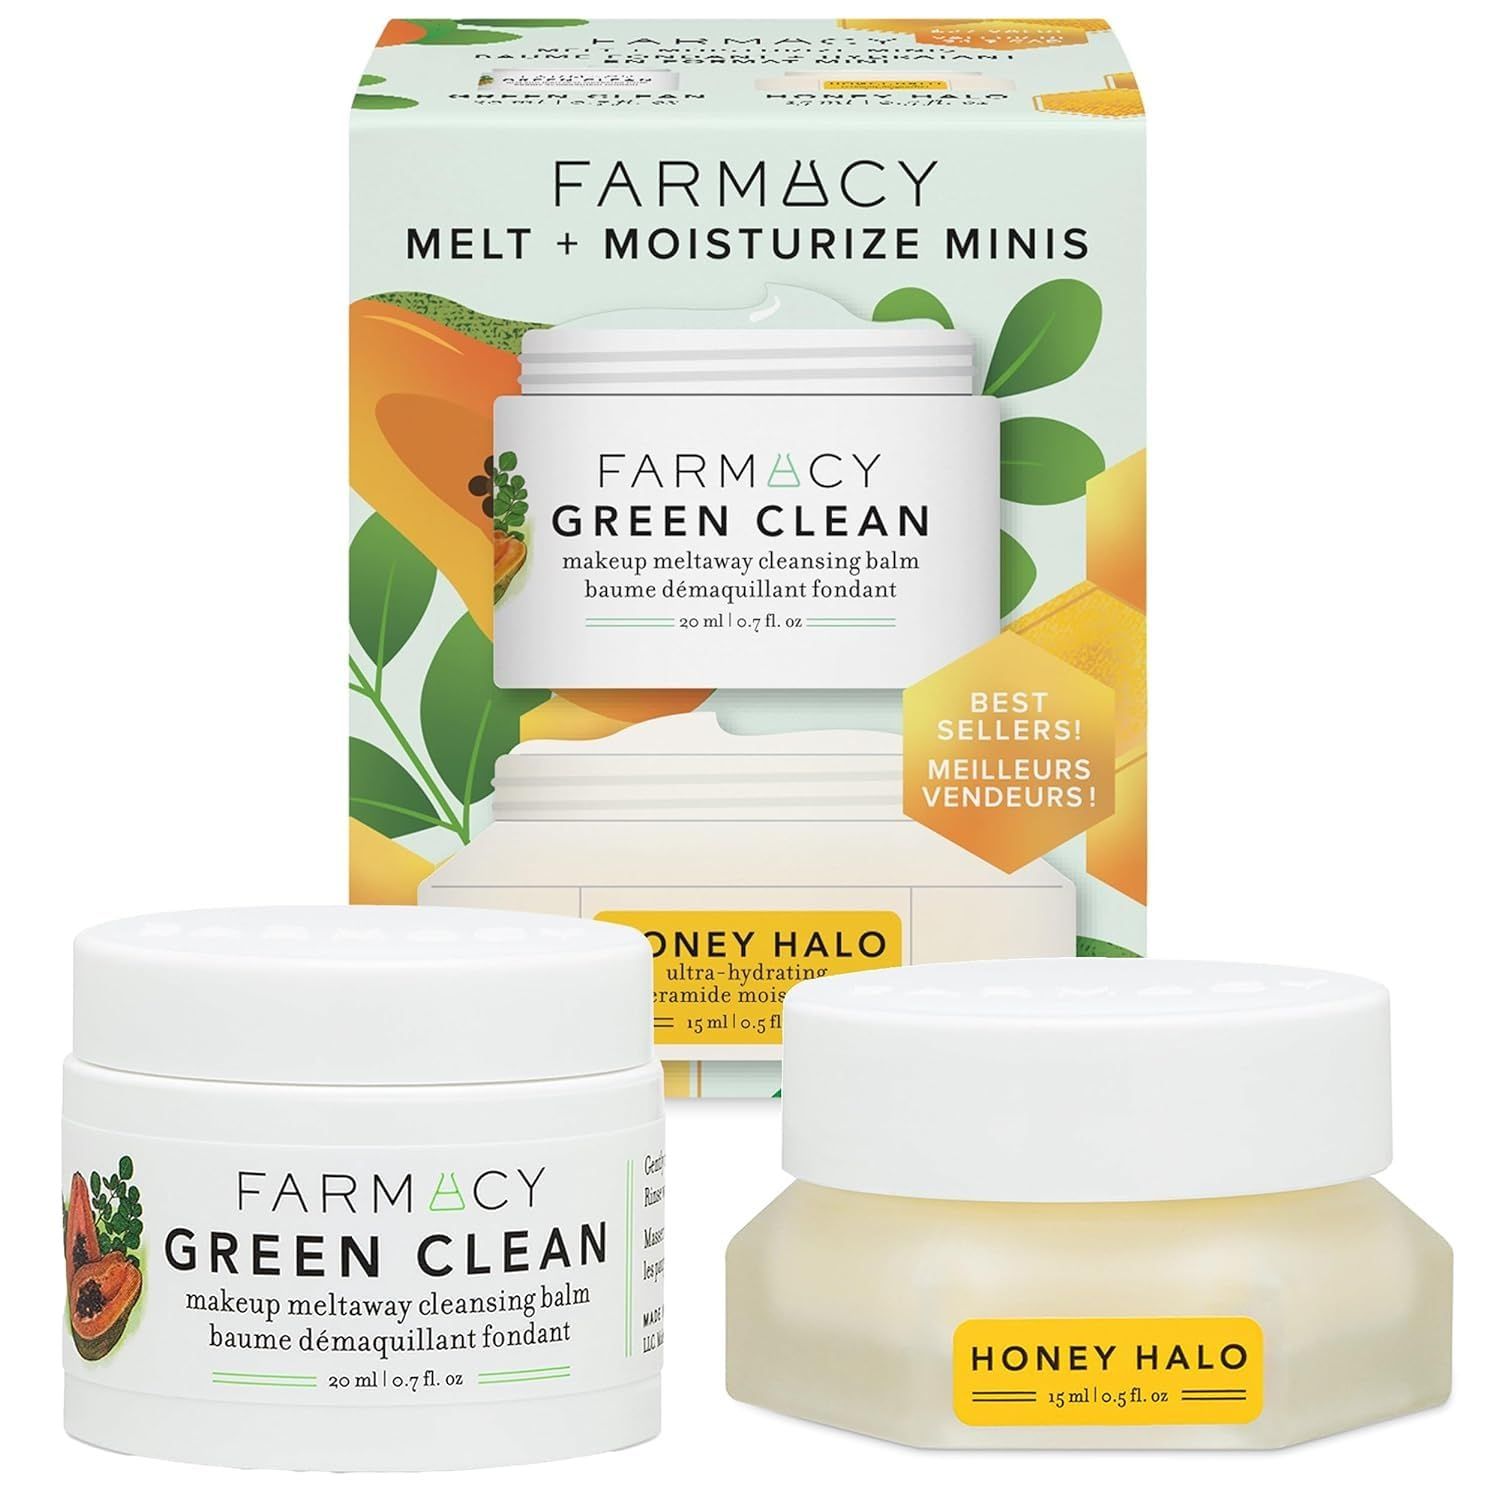 Farmacy Melt + Moisturize Minis Duo - Green Clean Makeup Remover Cleansing Balm & Honey Halo Cera... | Amazon (US)